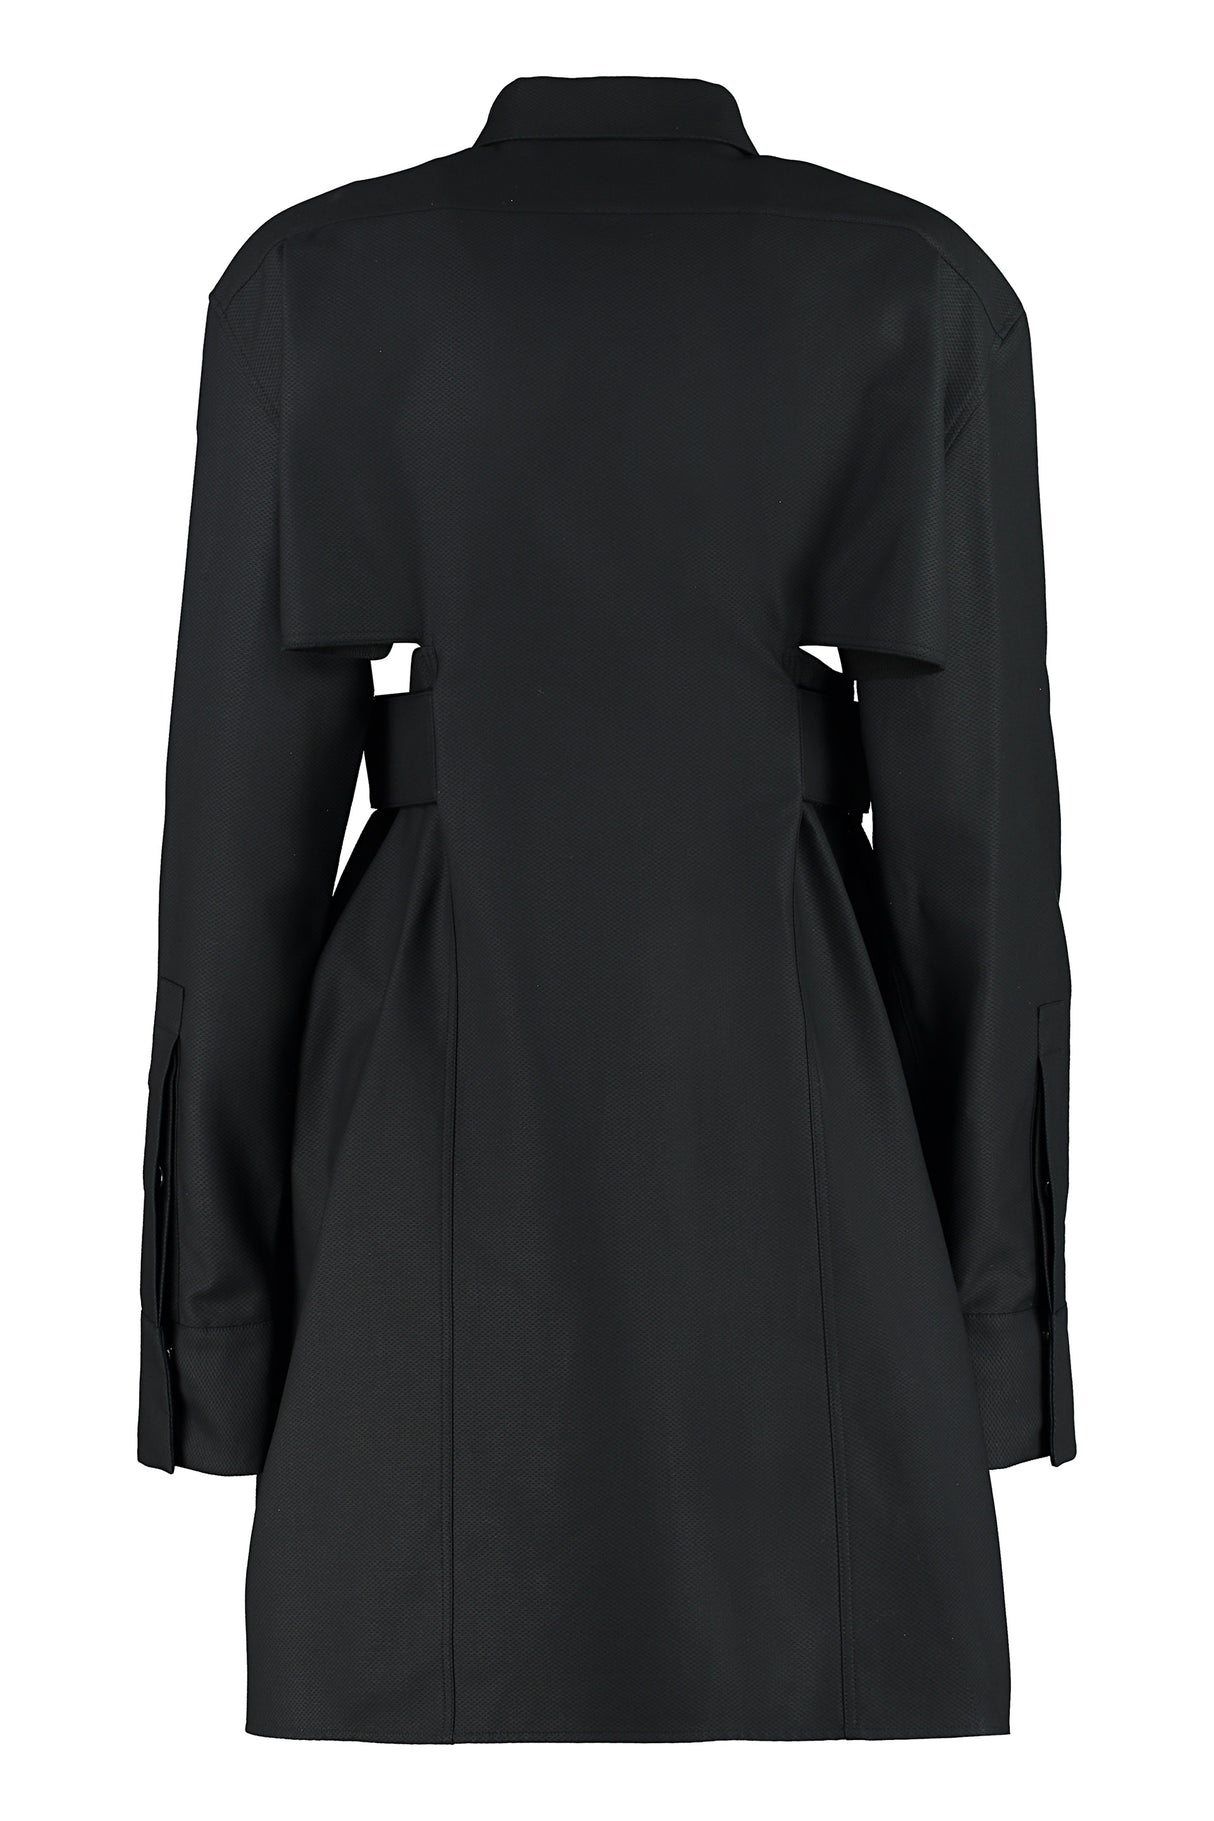 GIVENCHY Black Cut Out Cotton Shirtdress for Women FW21